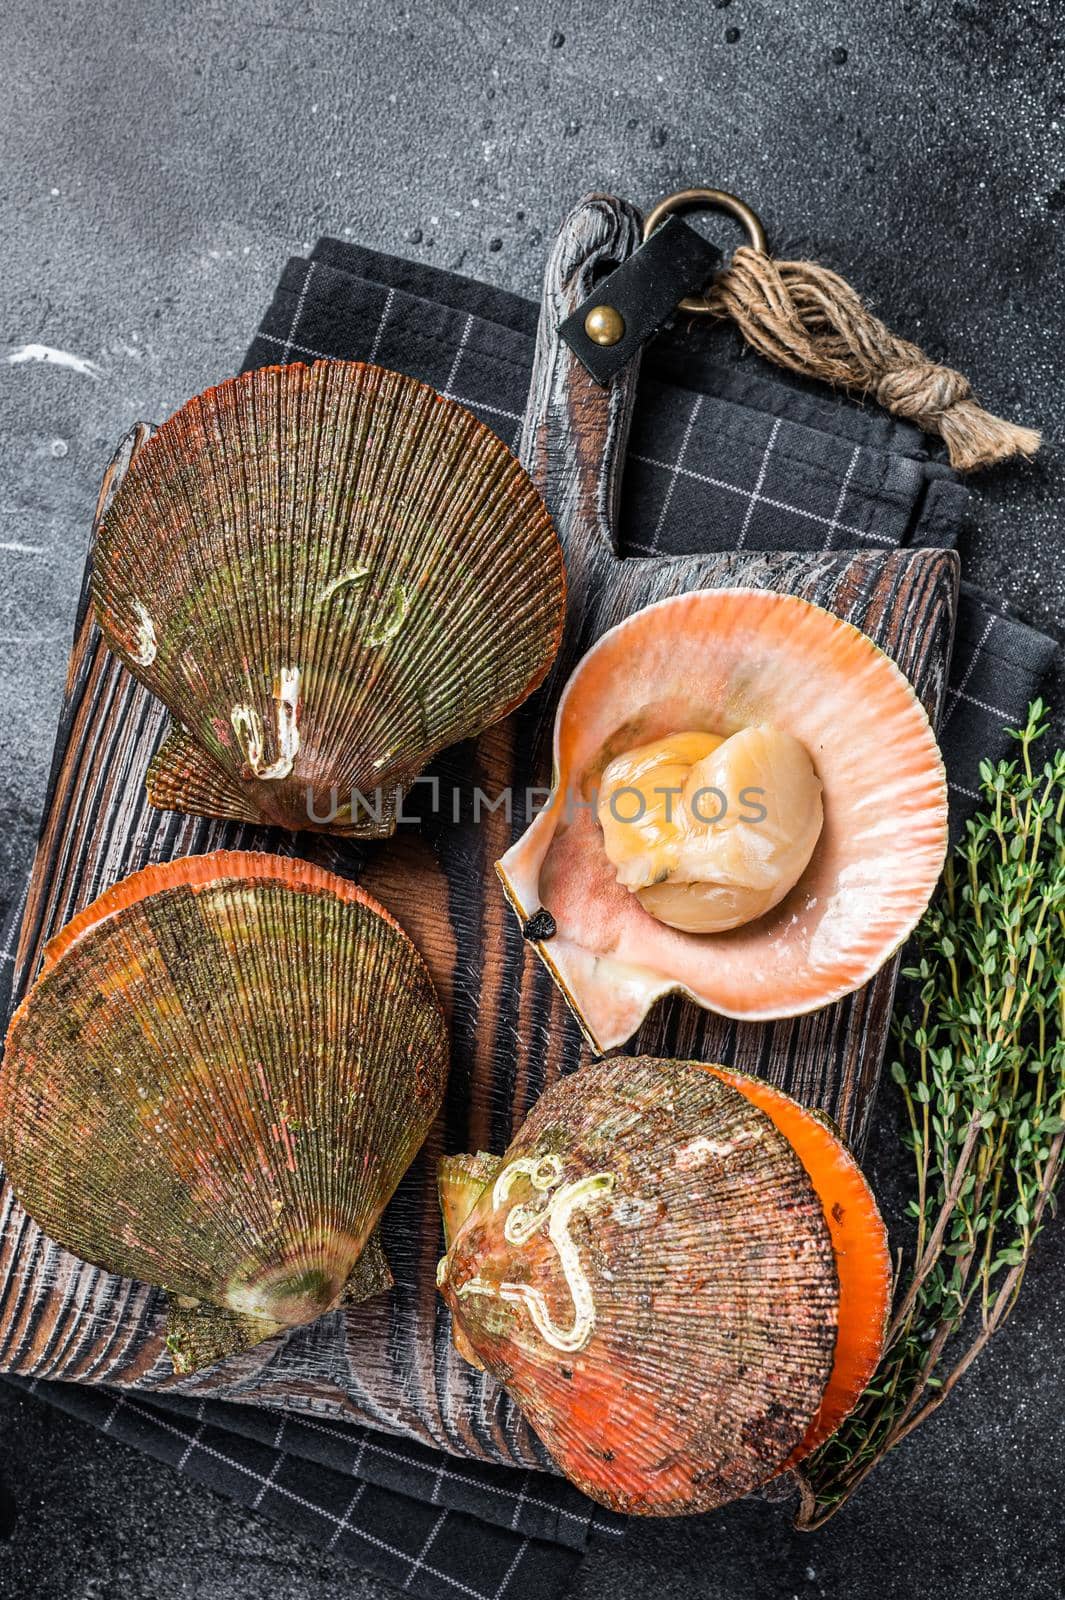 Uncooked Raw Queen Scallops on a wooden board. Black background. Top view.